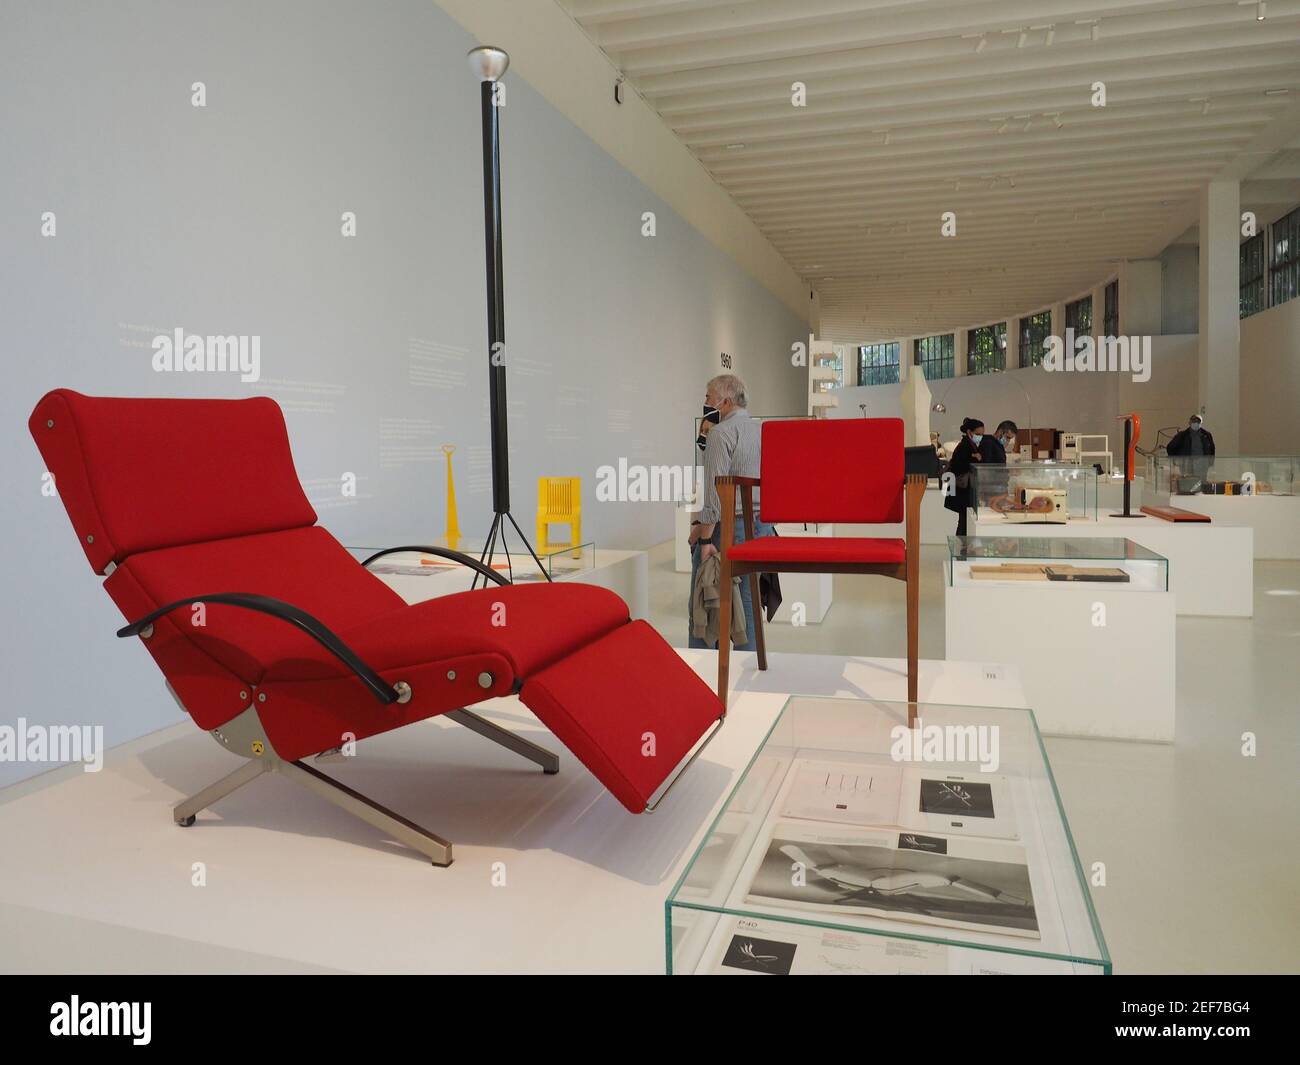 Europe, Italy, Lombardy, Milan, Triennale art gallery modern and contemporary architecture Stock Photo